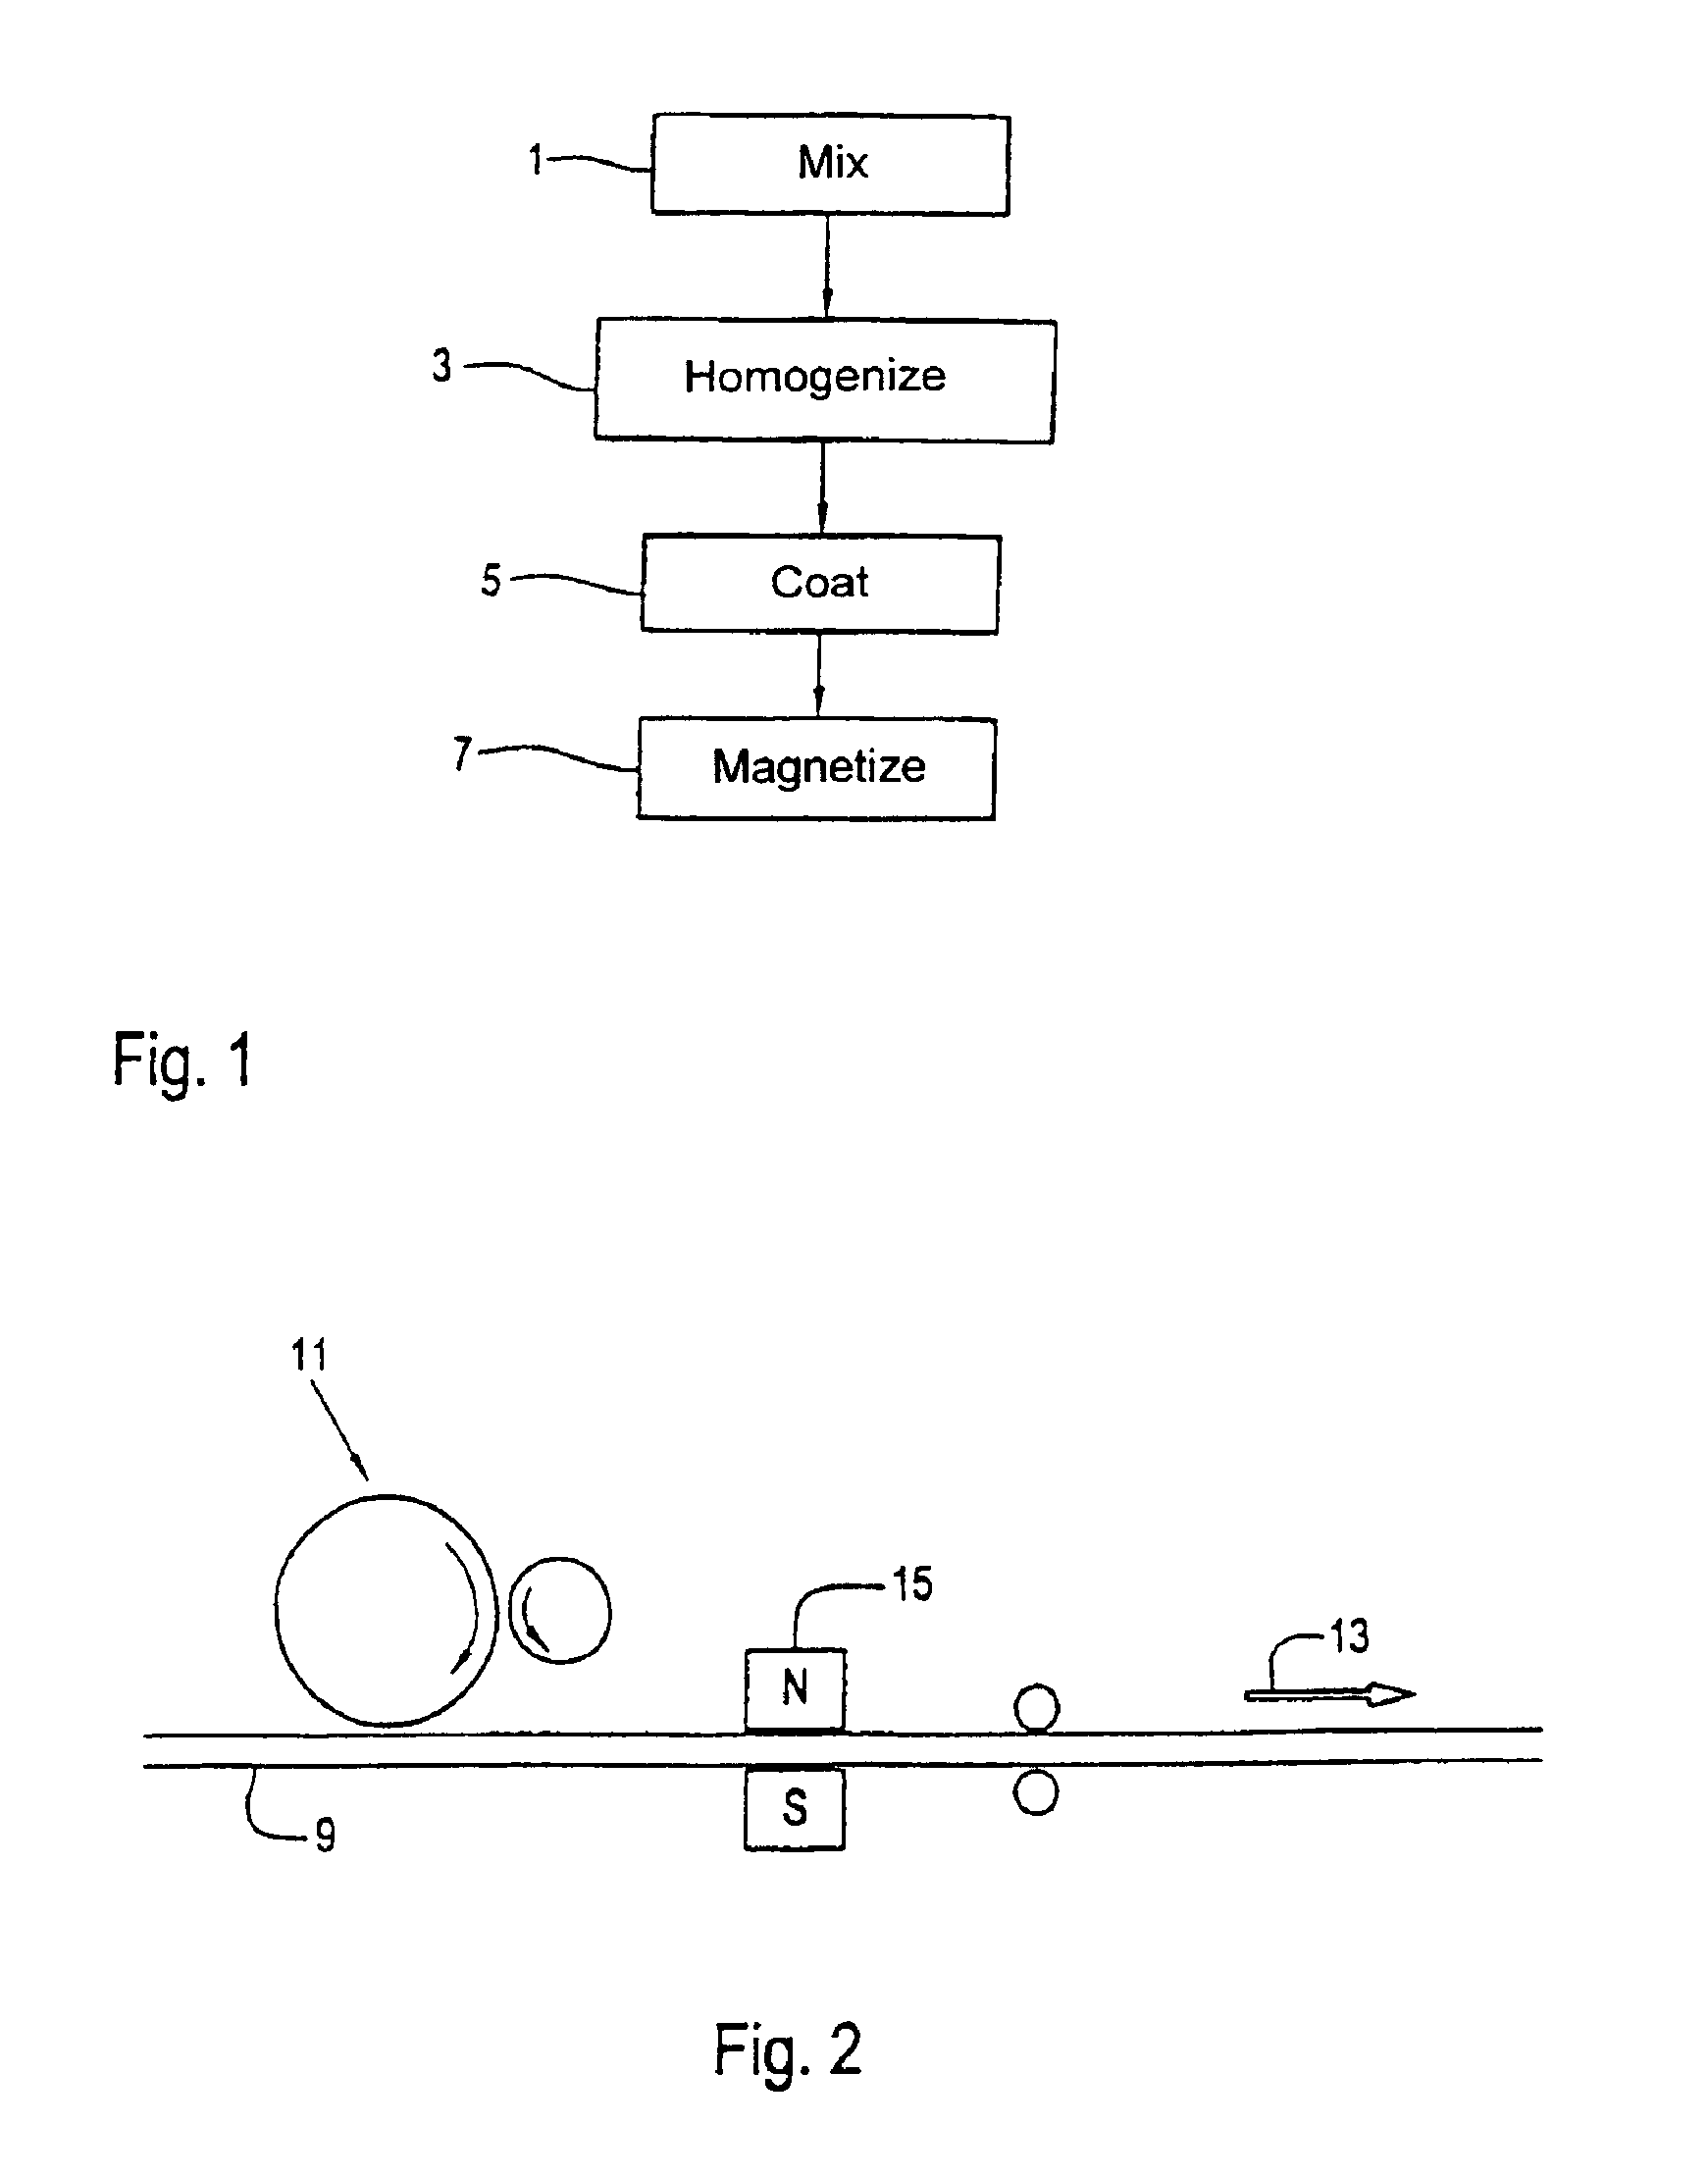 Apparatus and method for making a magnetic coated medium, and a coated medium therefrom